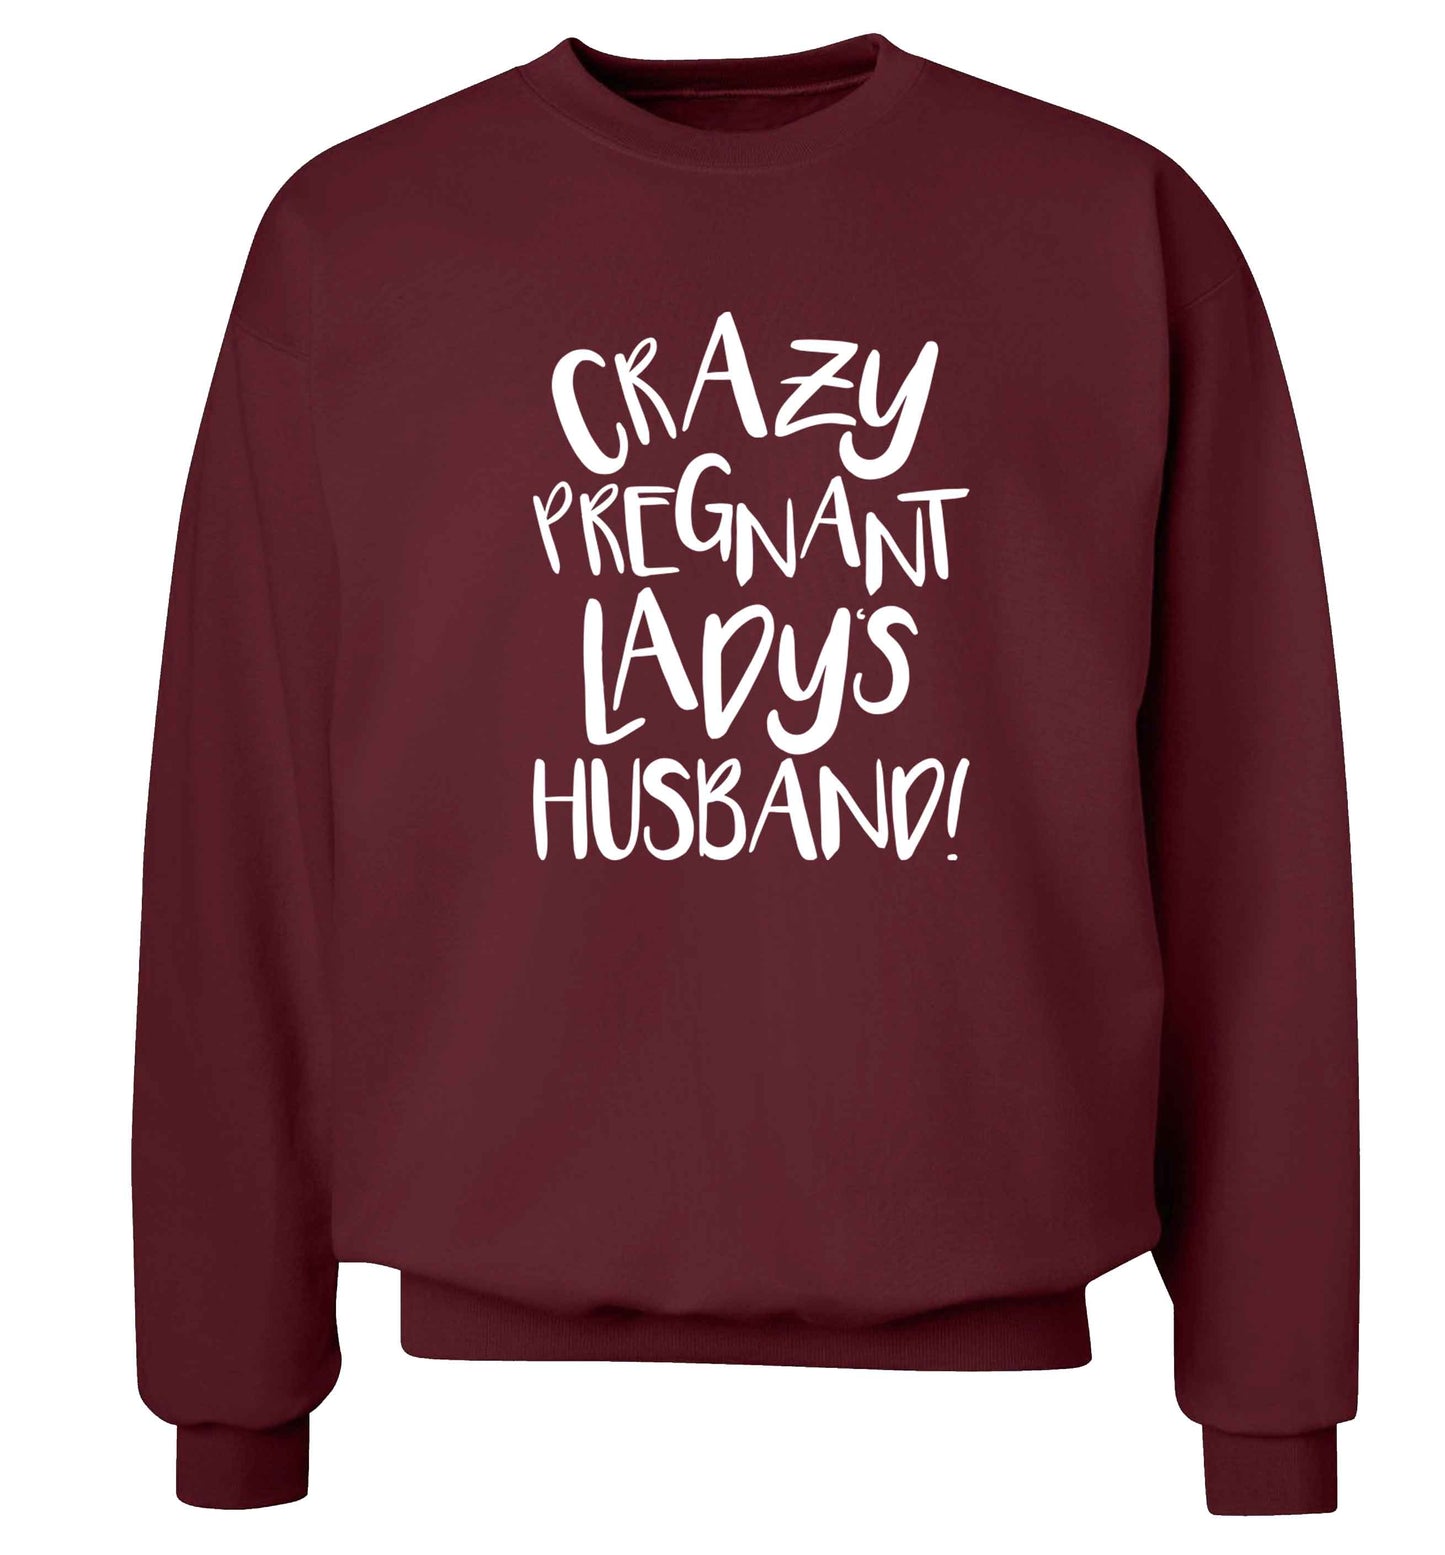 Crazy pregnant lady's husband Adult's unisex maroon Sweater 2XL